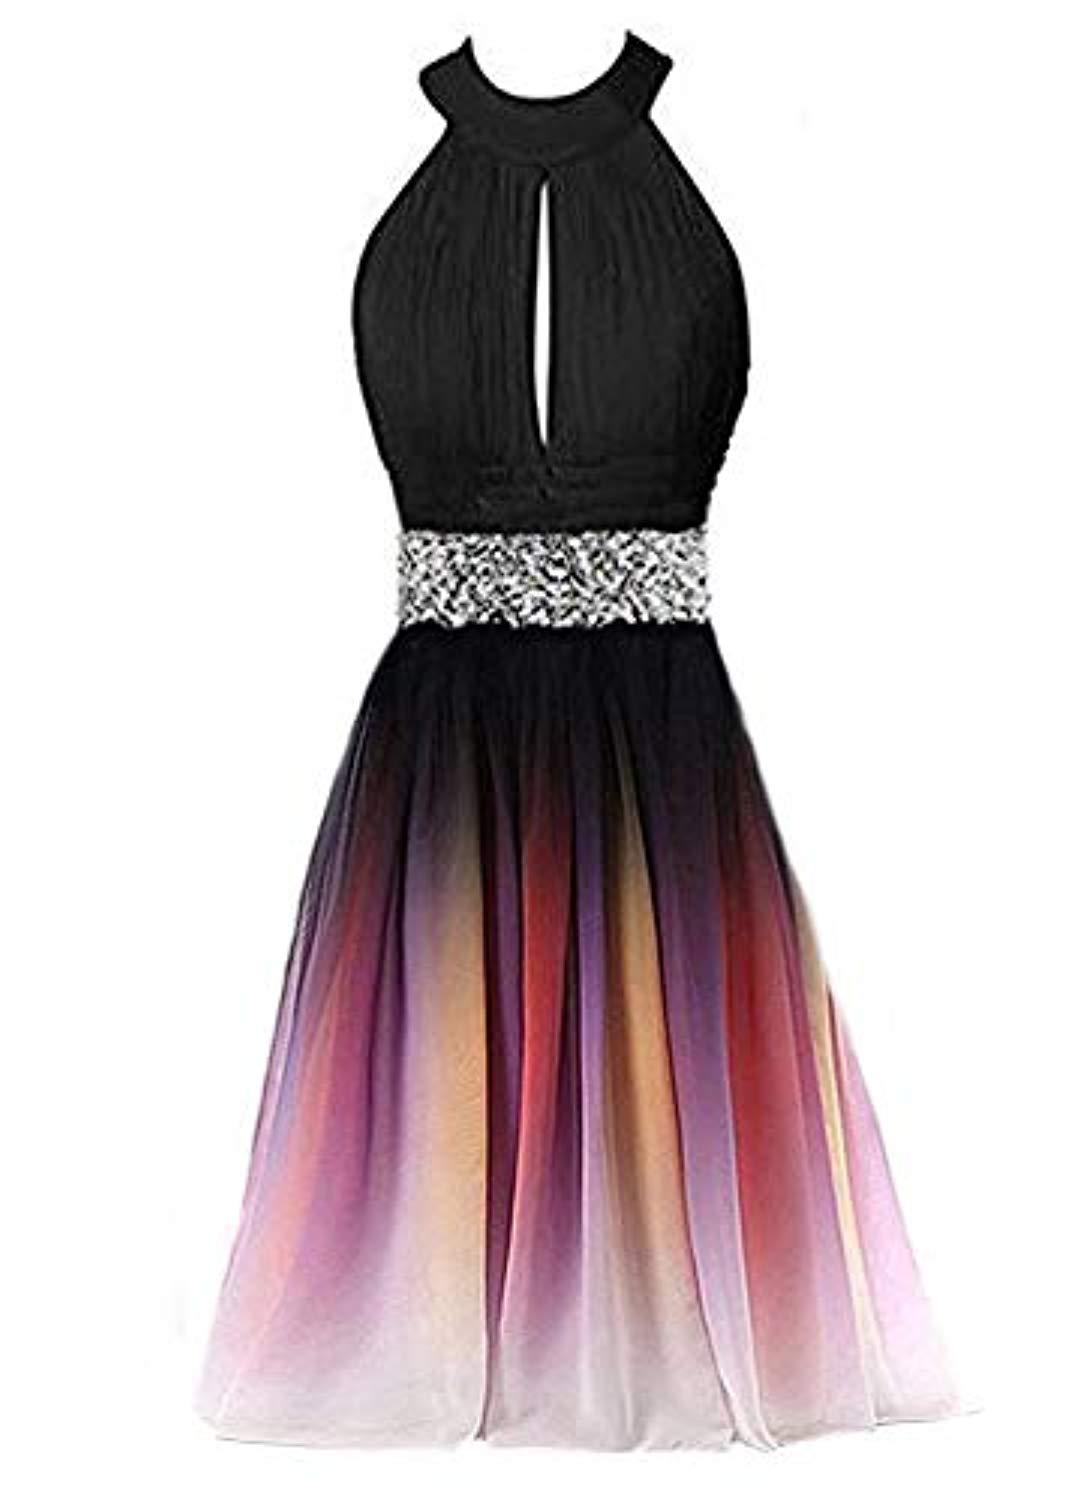 Fashion A Line High Low Halter Short Prom Dresses Beaded Mini Prom Party Gowns Custom Made Prom Gowns ,short Graient Homecoming Dress